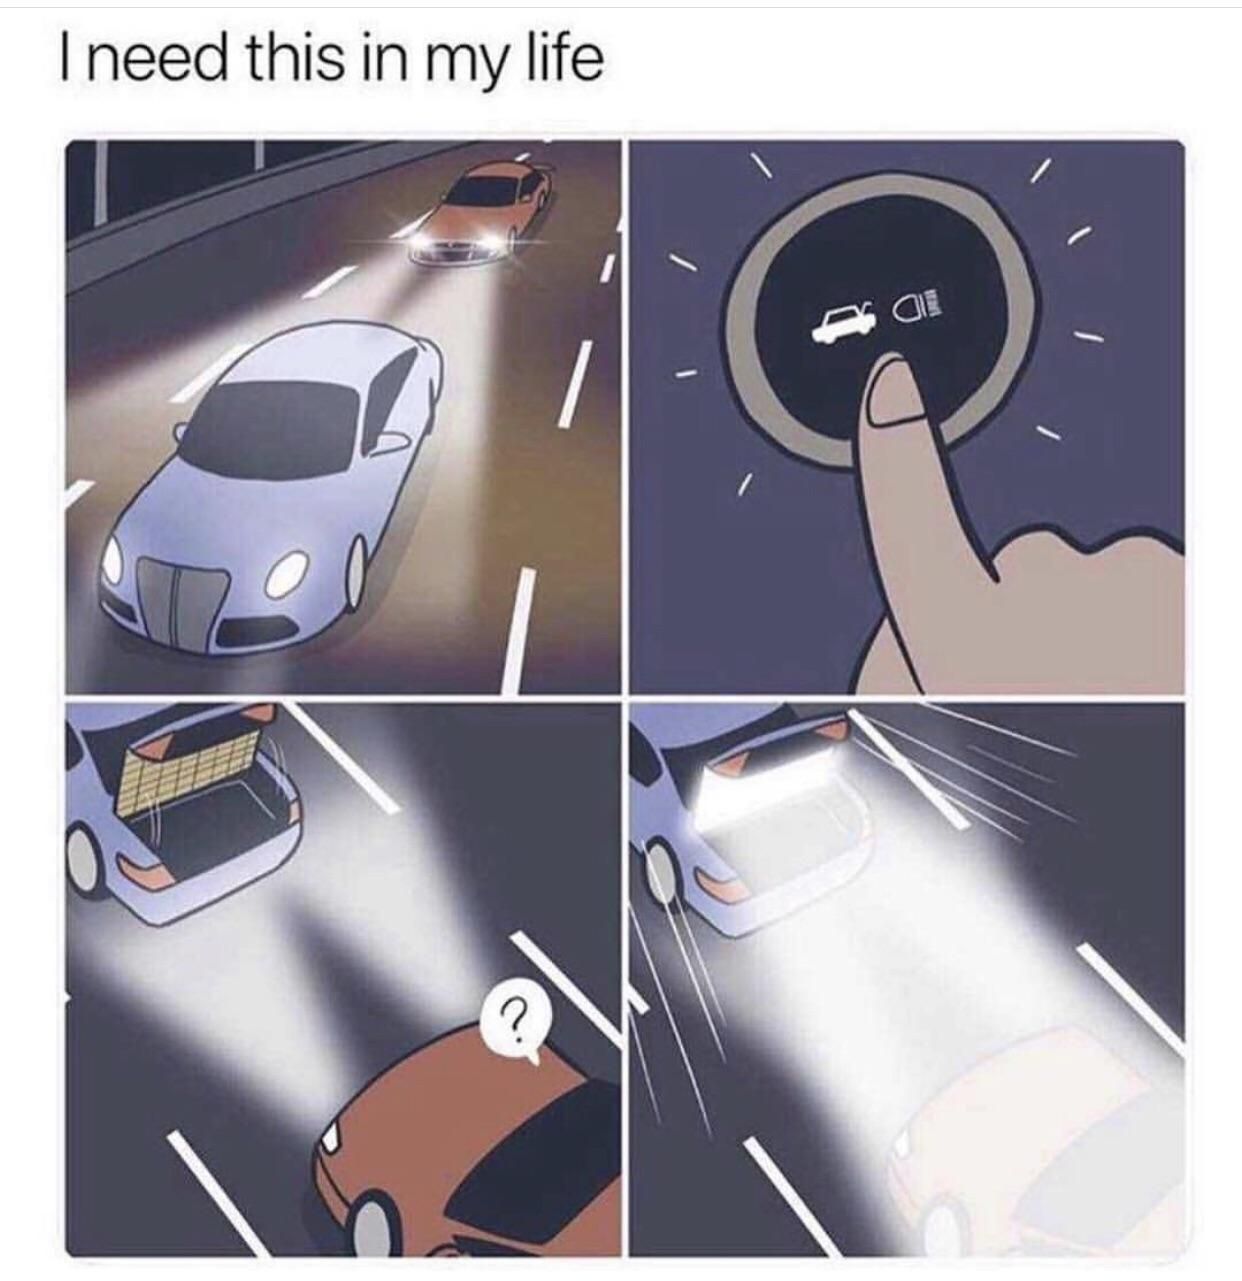 After seeing so many complaints about the use of new LED headlights . . .